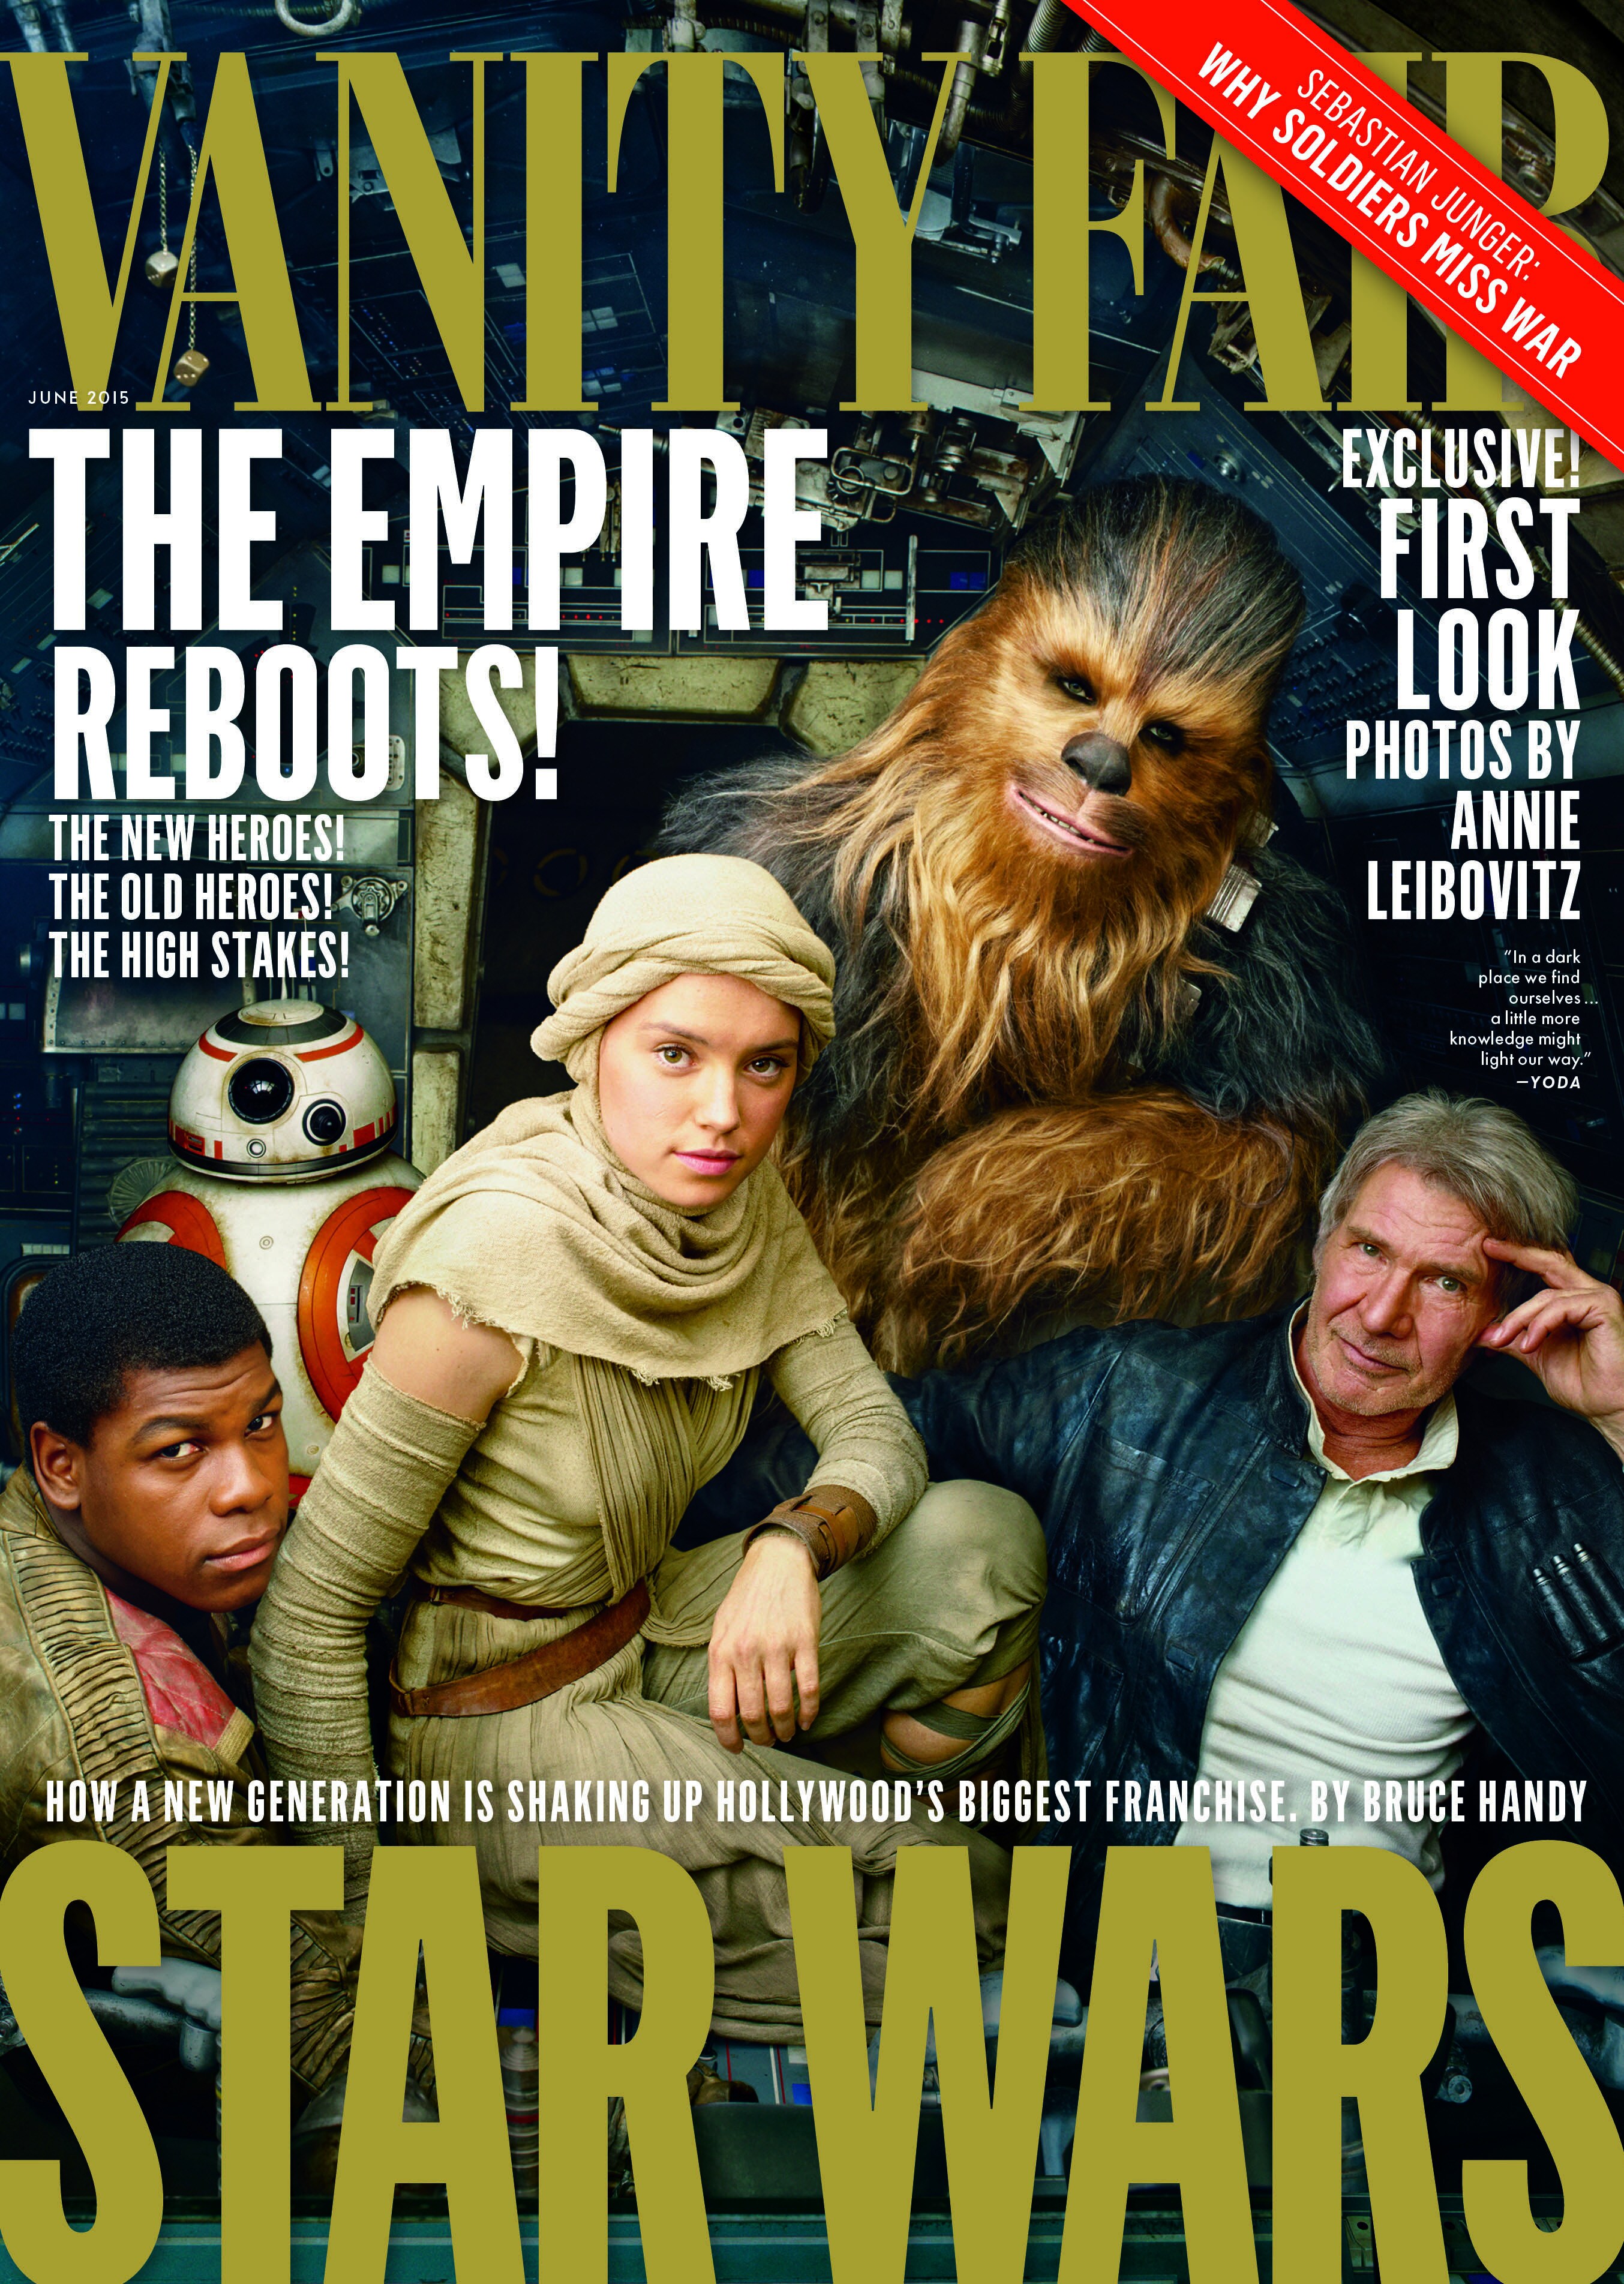 Vanity Fair's Star Wars: The Force Awakens cover by Annie Leibovitz